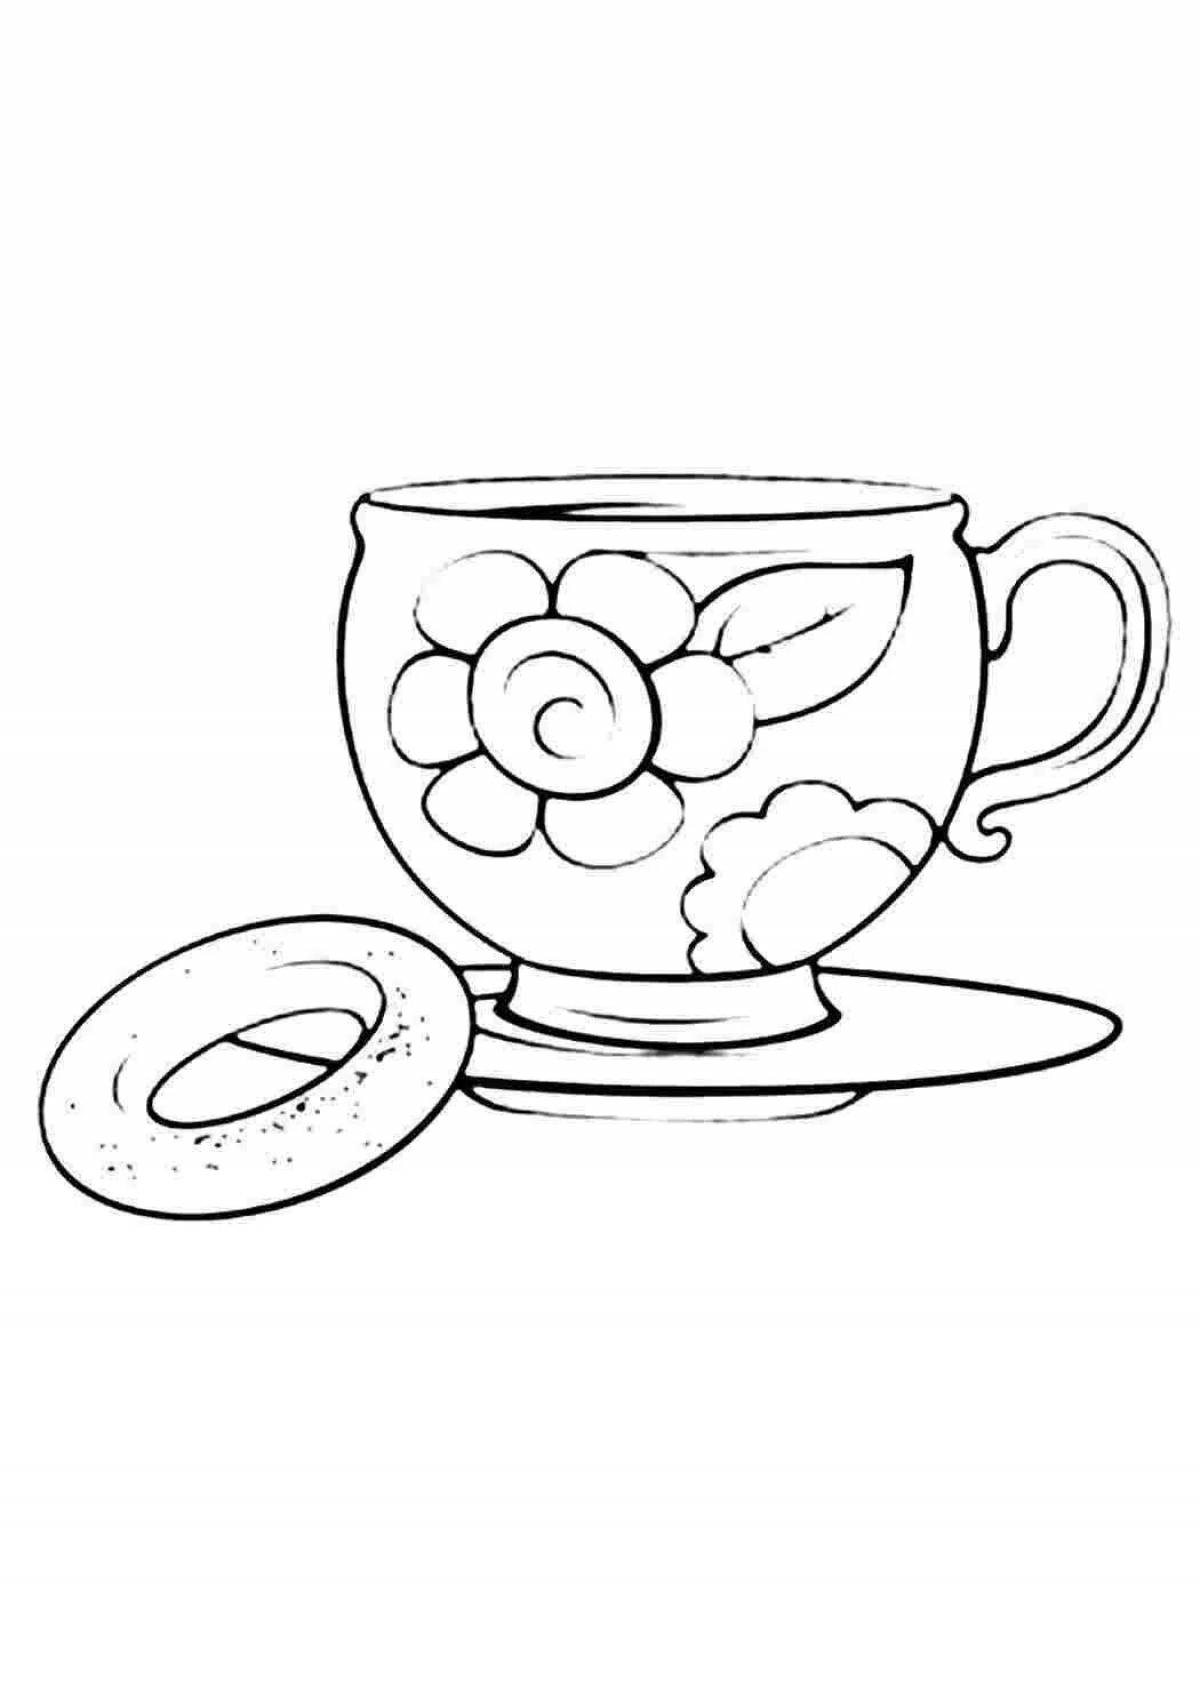 Coloring tableware for children